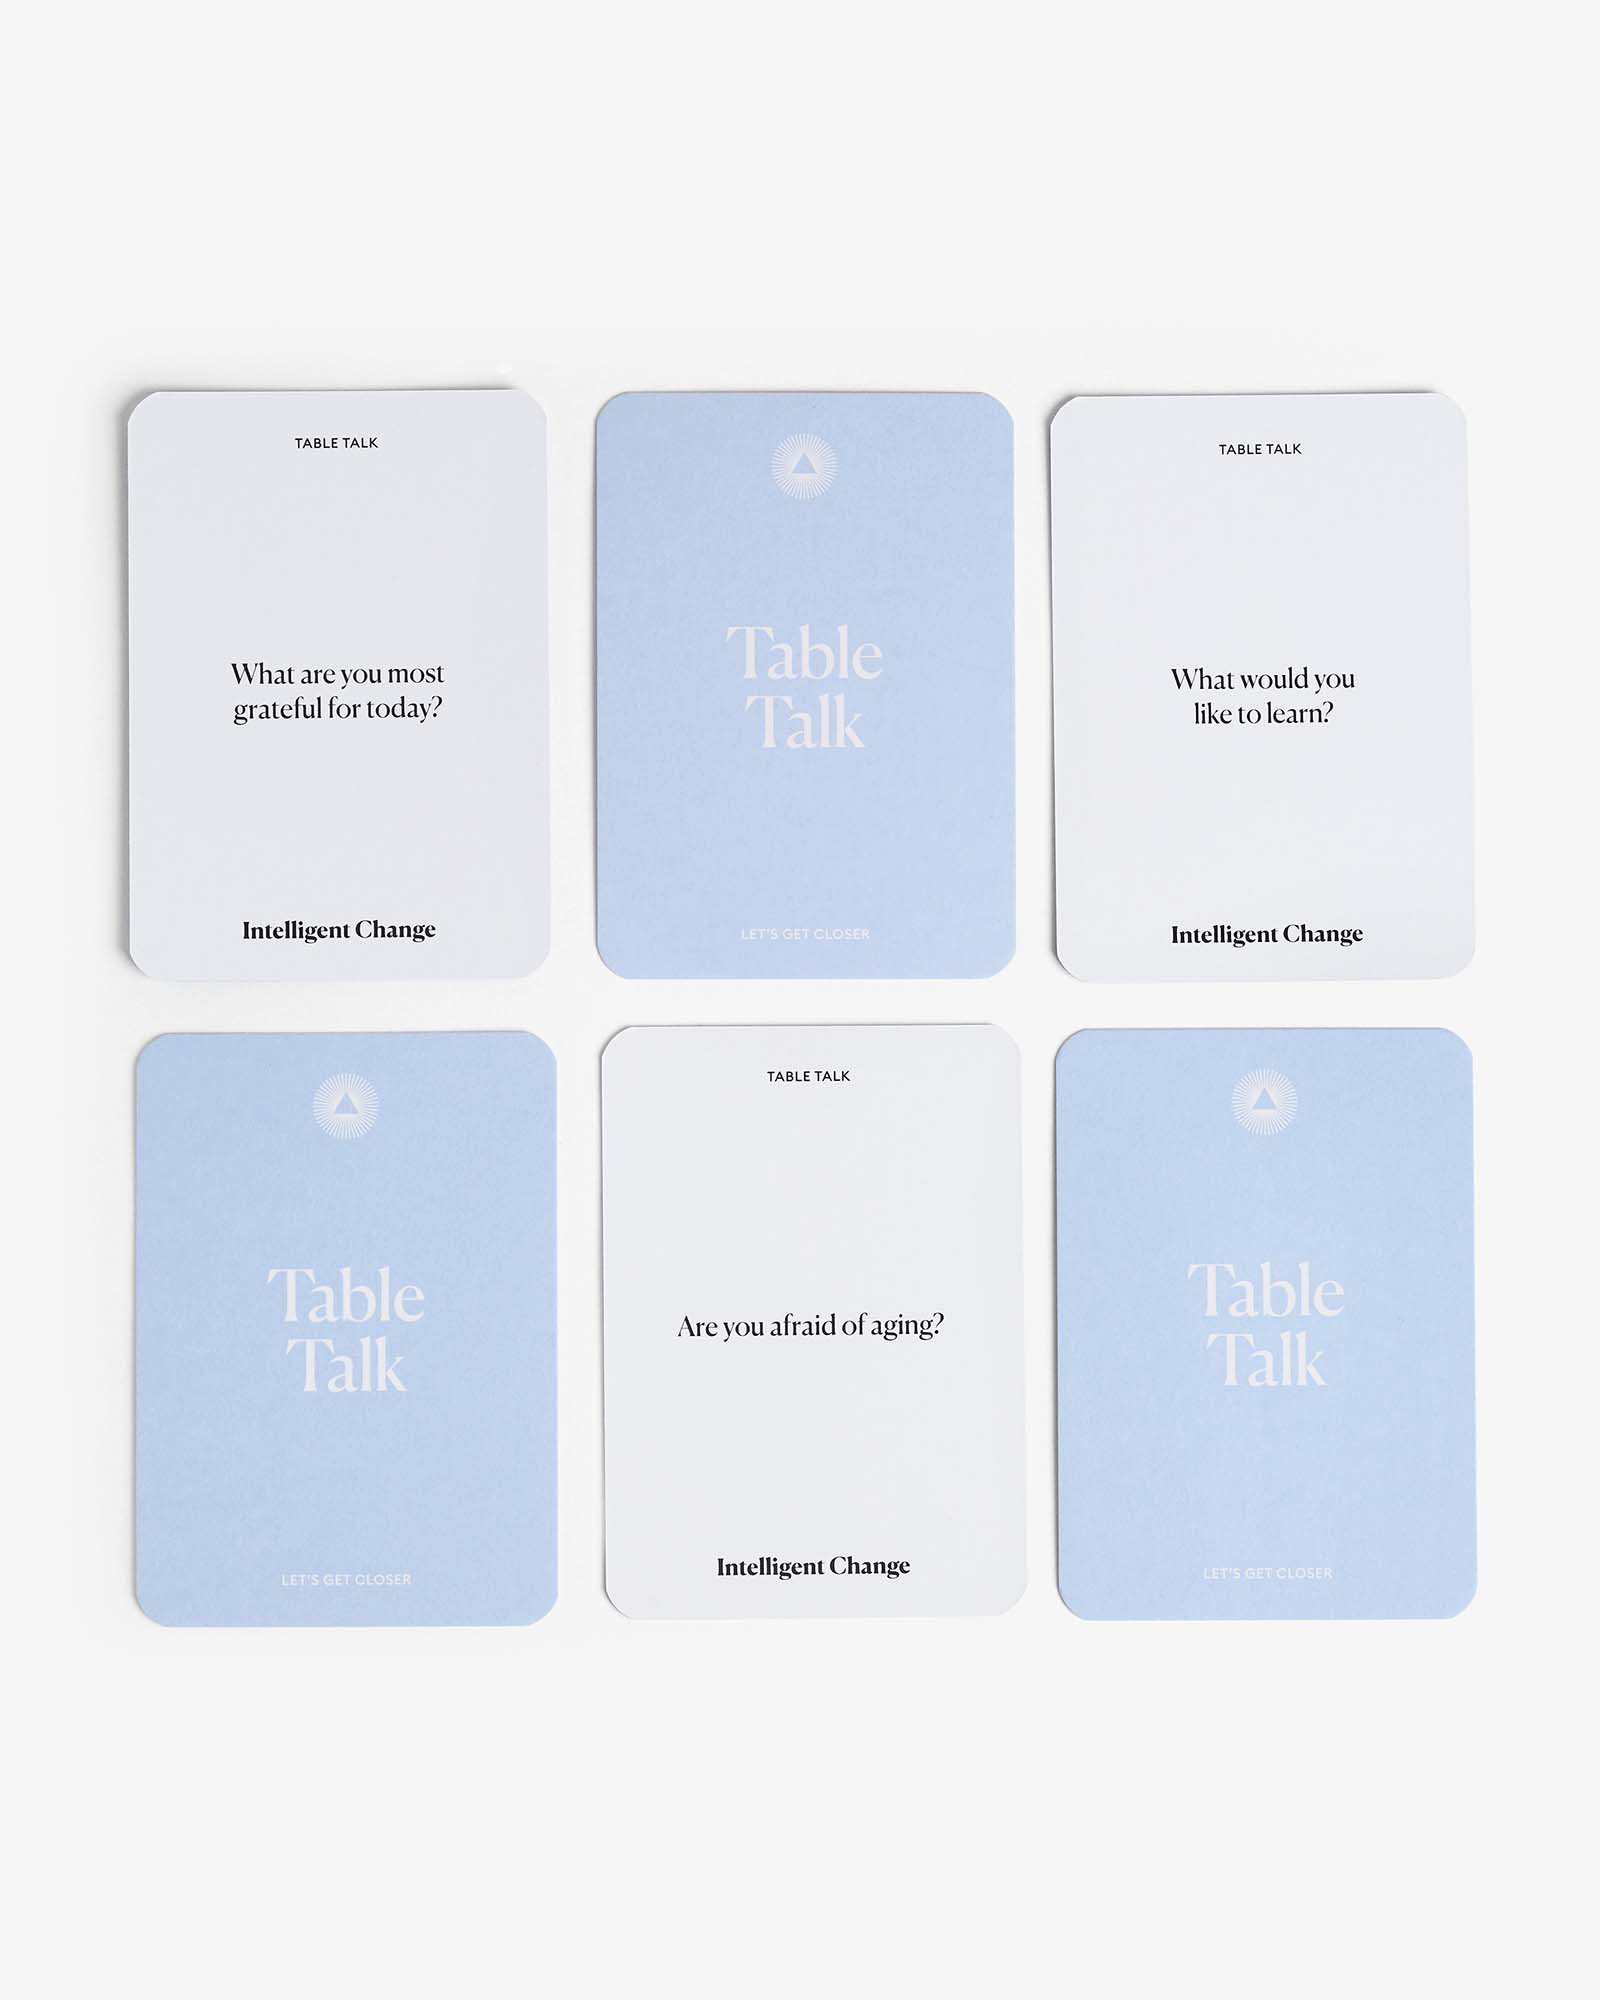  Let's Get Closer: Table Talk - Table Talk by Intelligent Change Intelligent Change Perfumarie